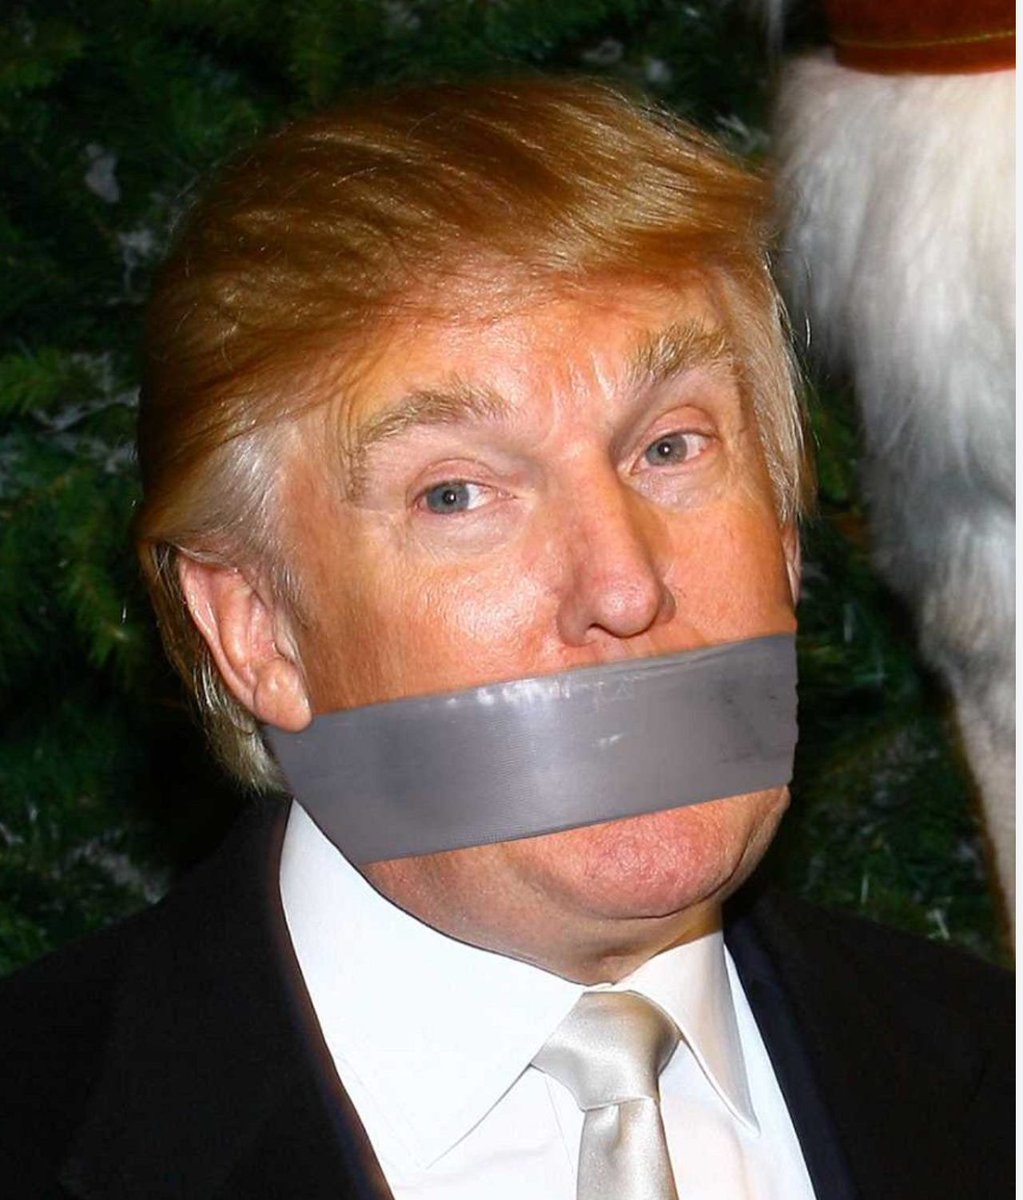 NY judge issues gag order on Trump in hush money trial, blasting his threatening, inflammatory, denigrating’ statements. -CNN #ShutHimUp then #LockHimUp